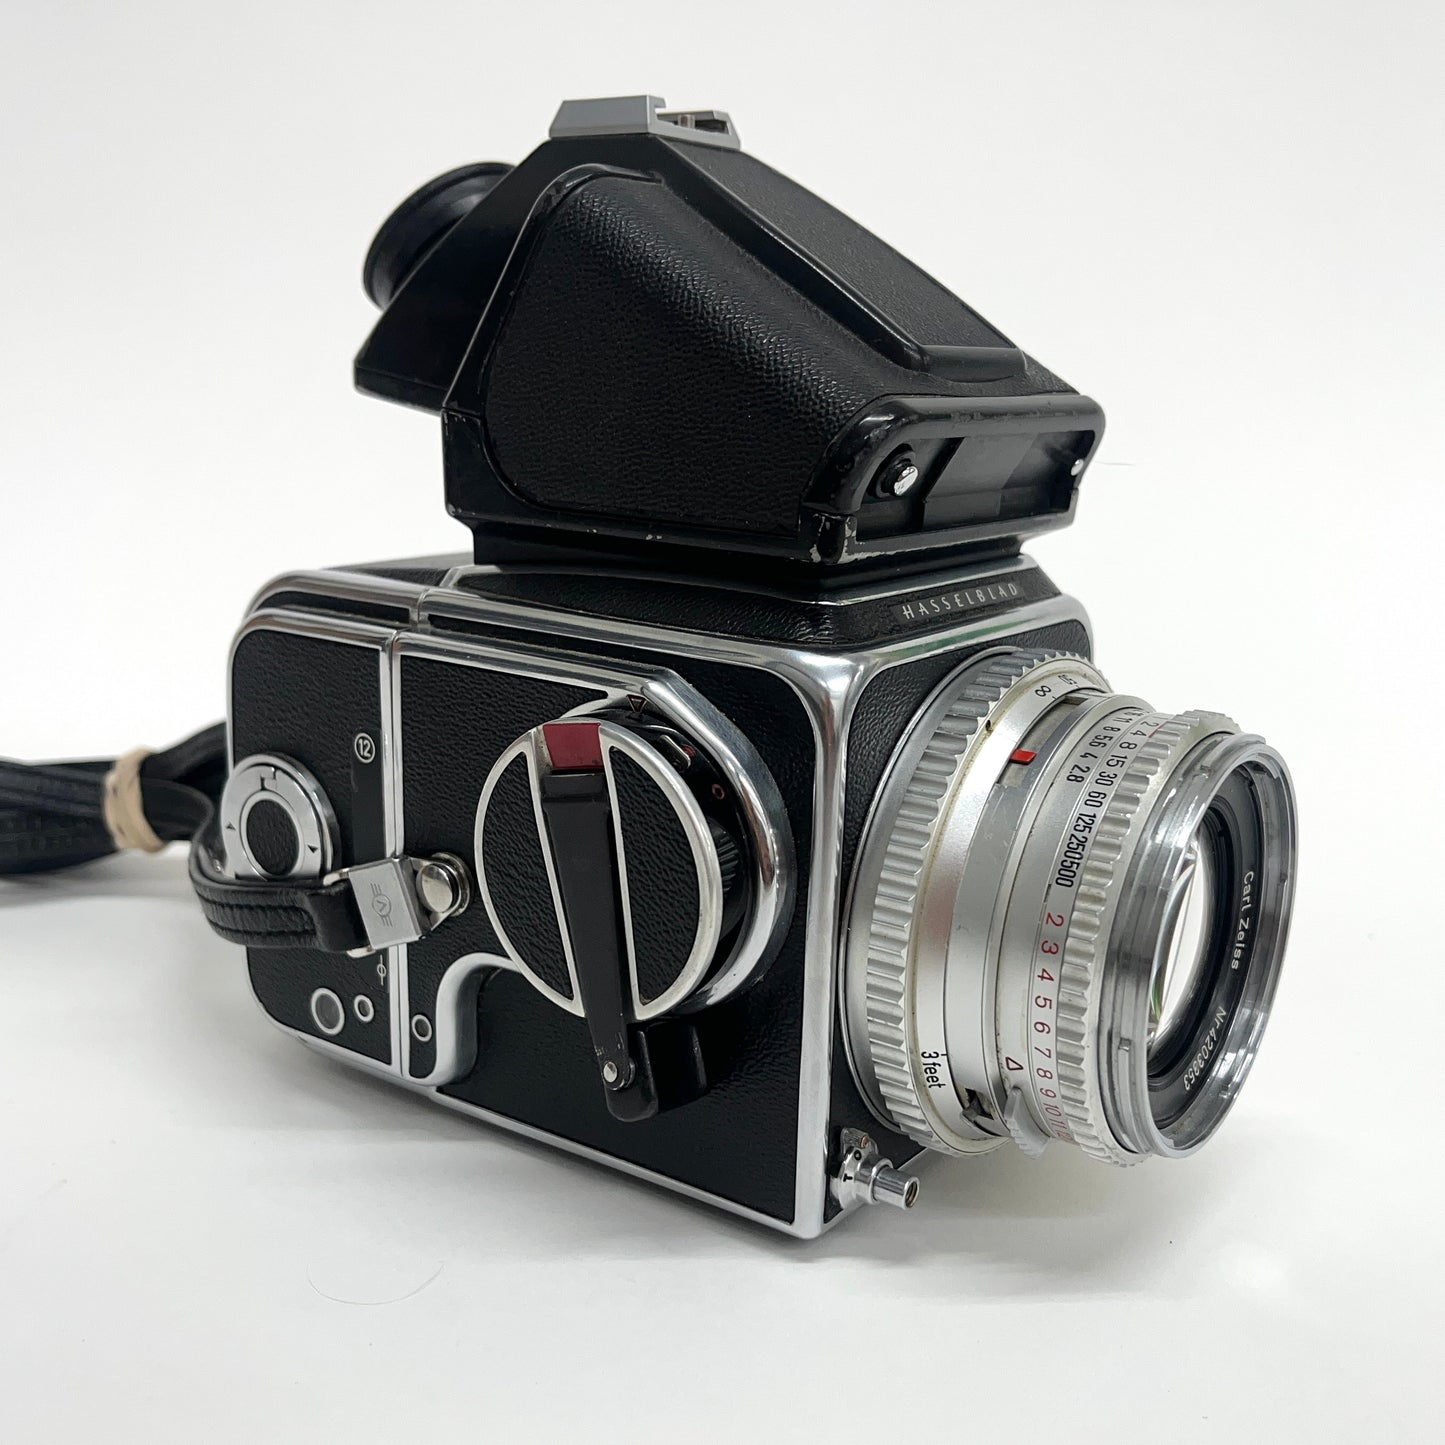 Hasselblad 500c Medium Format Body with 80mm f/2.8 Lens and Prism